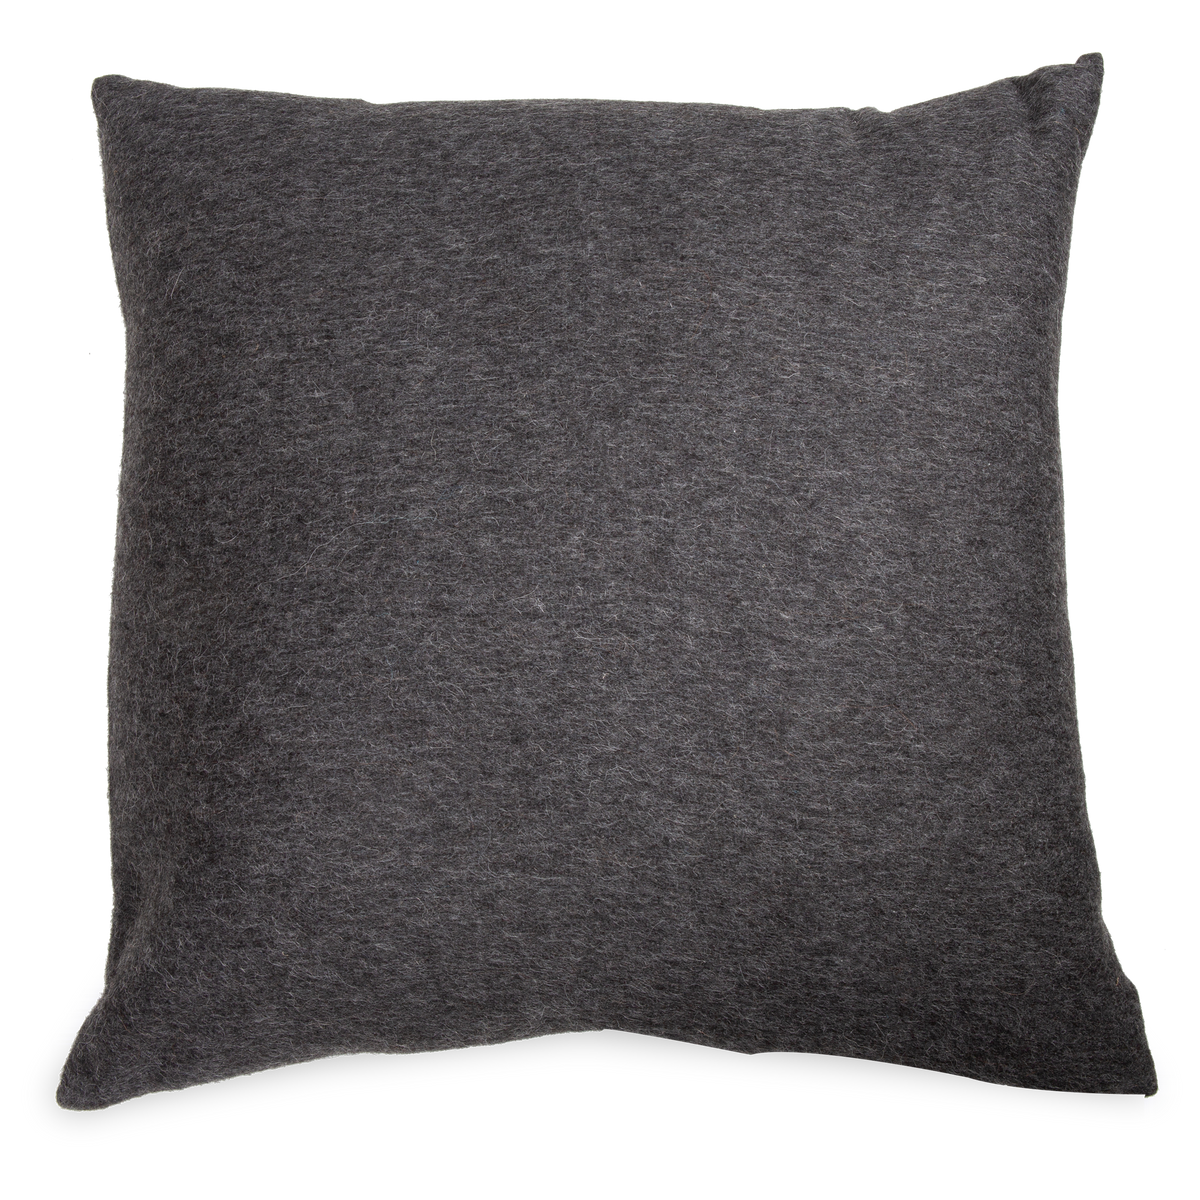 The Alpaca Lambswool Pillow is a classic design made from alpaca and lambswool fibres featuring a delicate texture in a charcoal grey color.